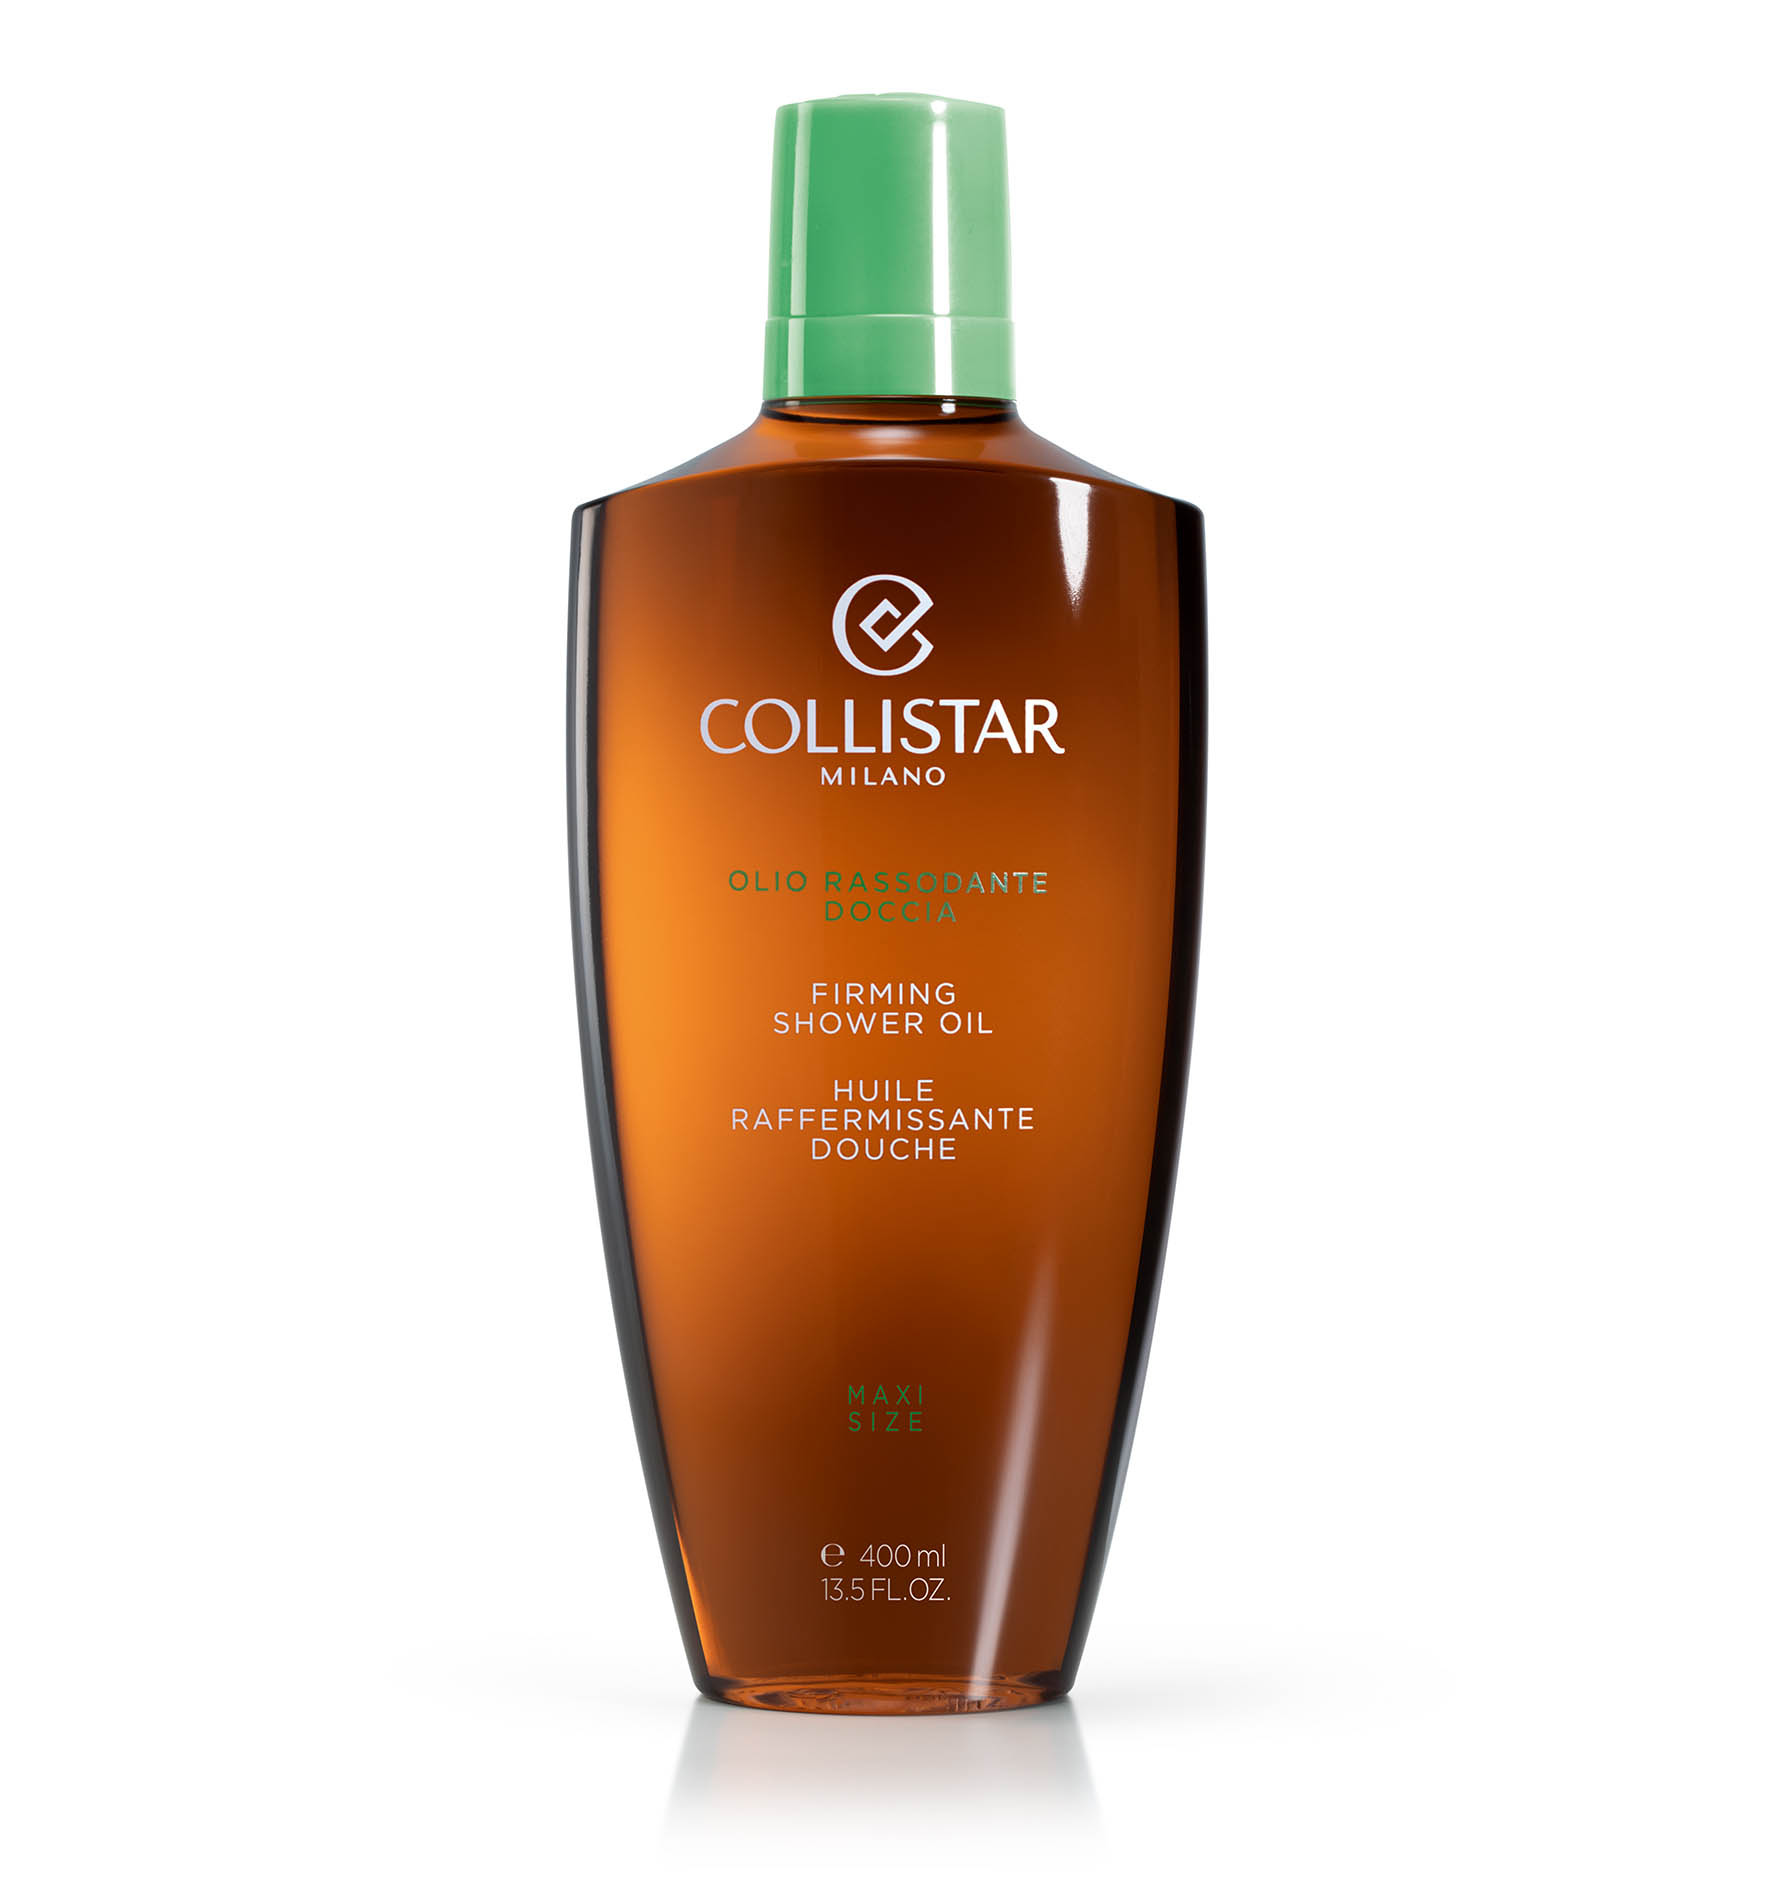 FIRMING SHOWER OIL - Creams and Oils | Collistar - Shop Online Ufficiale